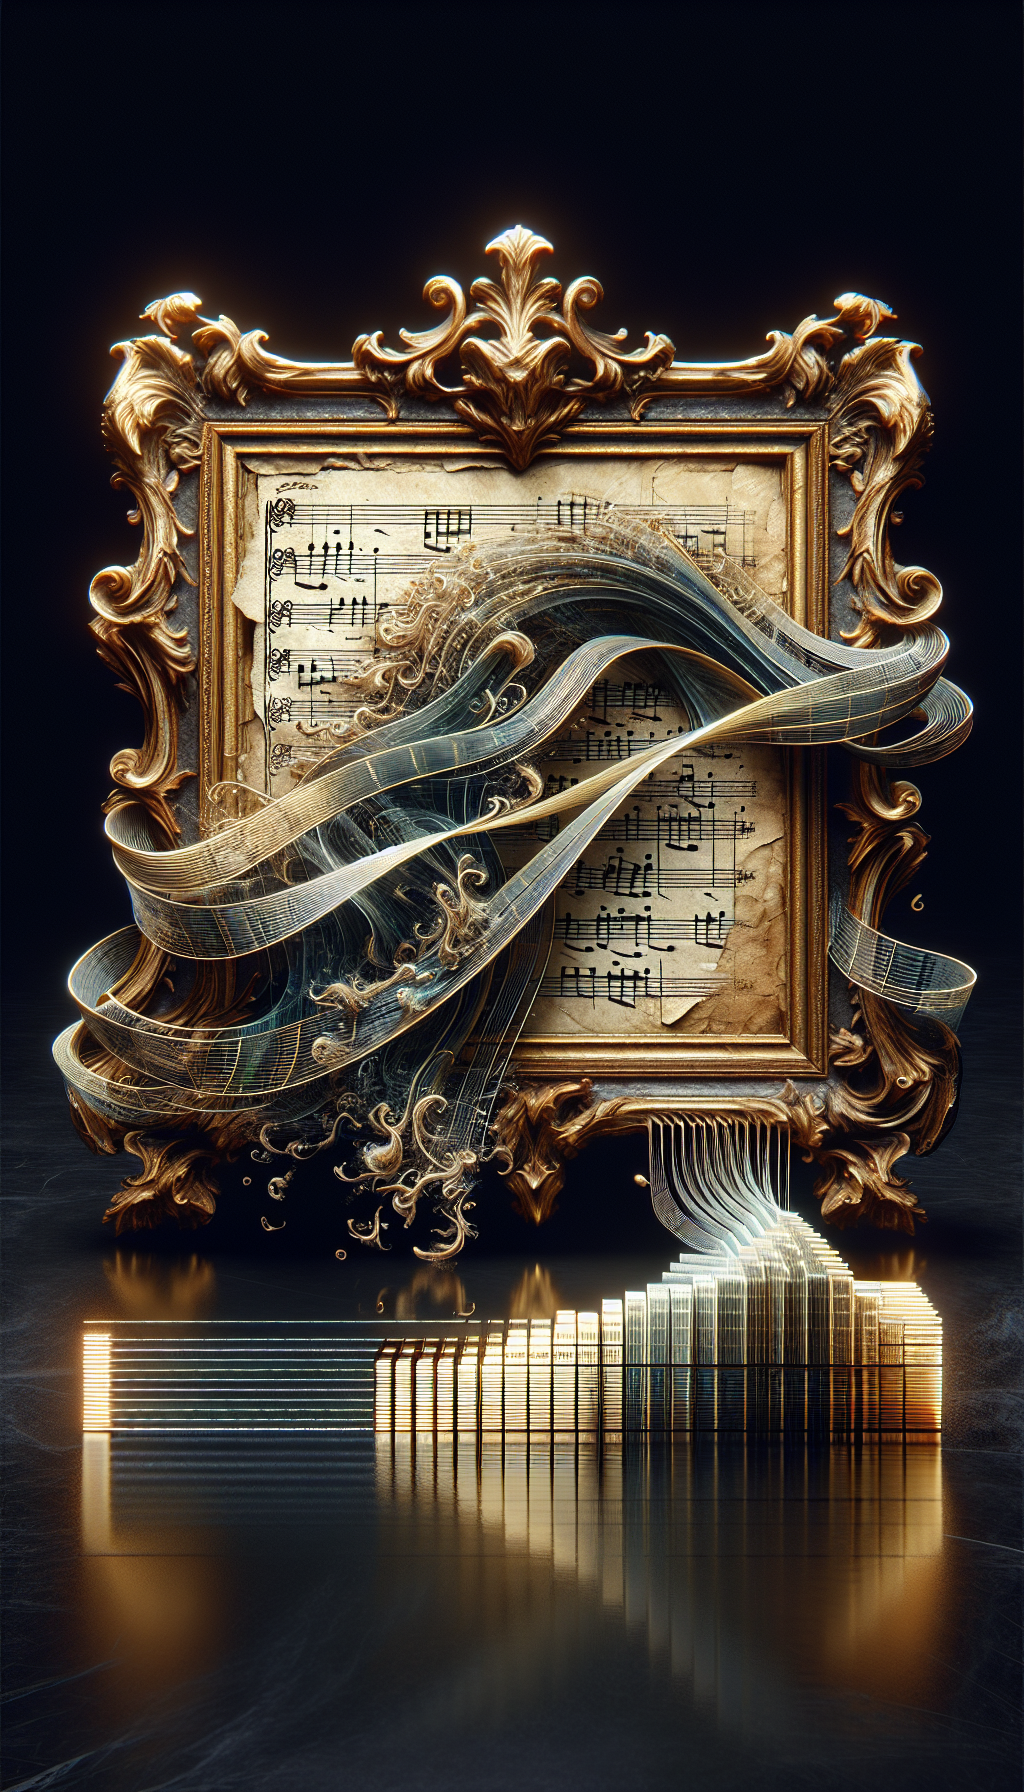 An intricate vignette of a grand, gilded baroque frame encases a faded sheet of music, where notes transform into delicate, sweeping flourishes and tendrils, suggesting their timeless beauty. At the base, a shimmering, translucent strip akin to an auctioneer's gavel reflects values in ascending script, subtly highlighting the sheet's appreciating worth across the ages, from past to present.